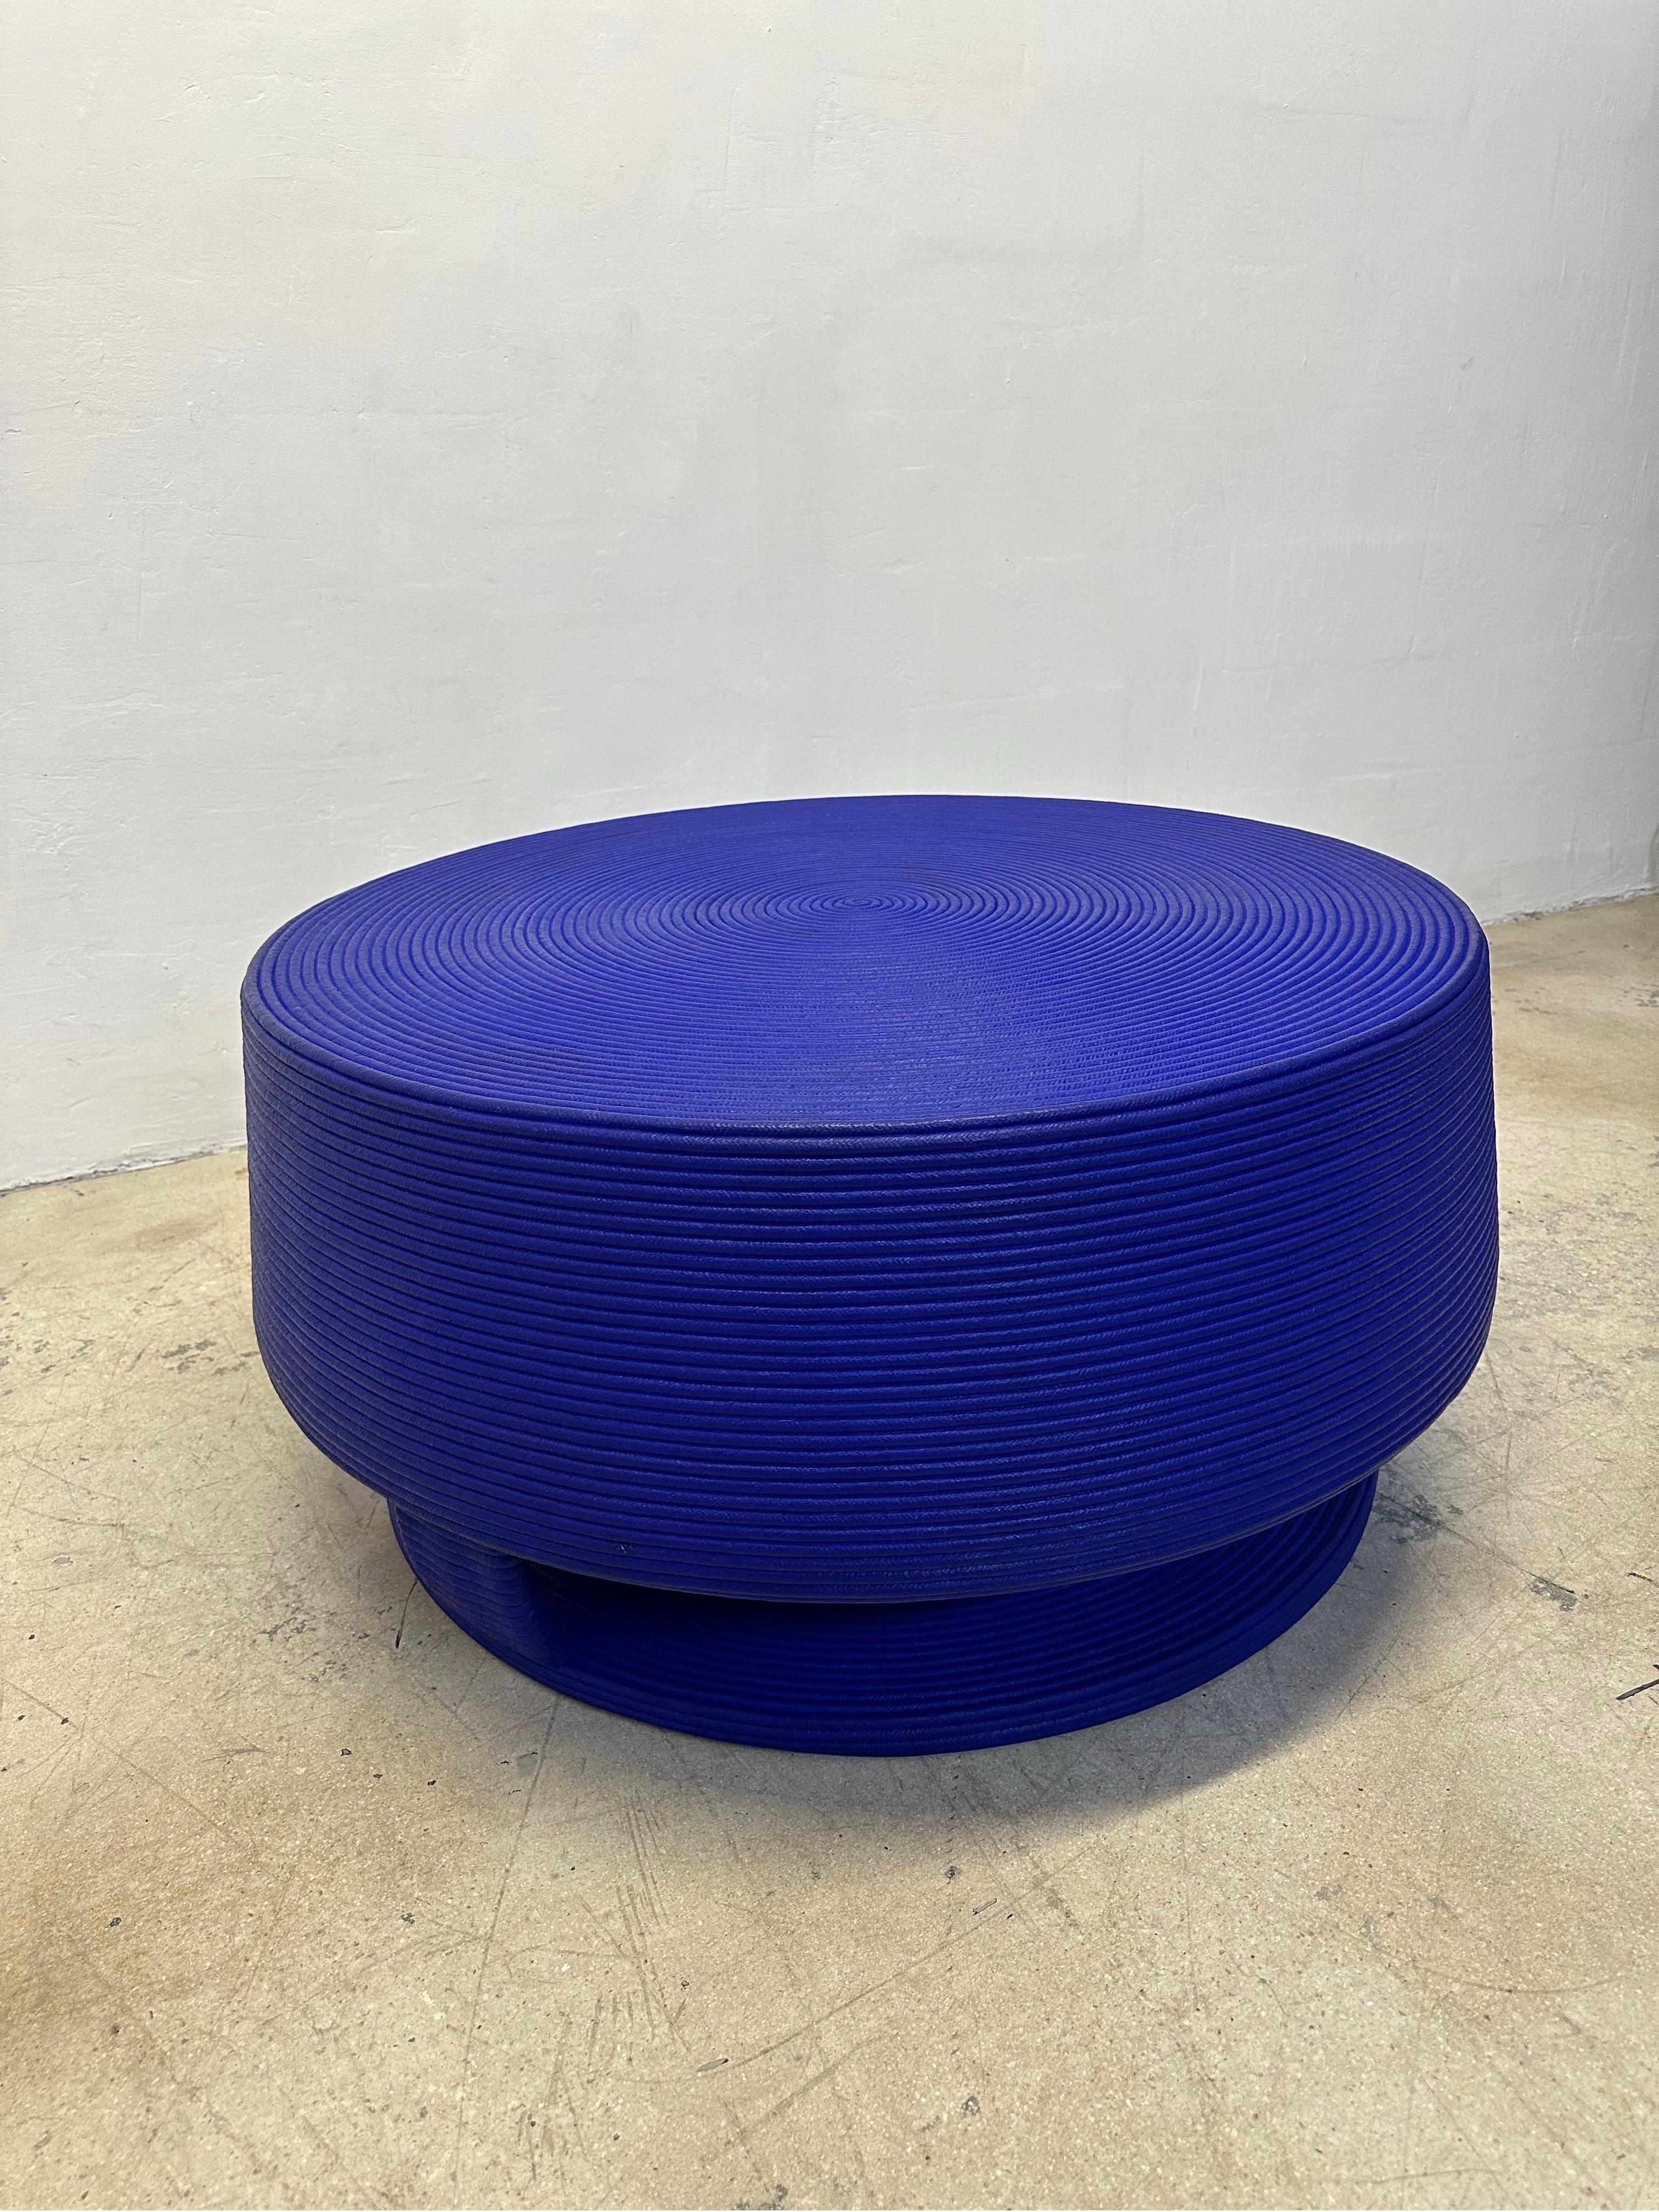 Yves Klein vivid blue rope clad Afritamu coffee table by Christian Astuguevieille.

Visual artist born (1946) and living in Paris, his work focuses on a roundabout but ingenious use of everyday materials. He transforms them into furniture,